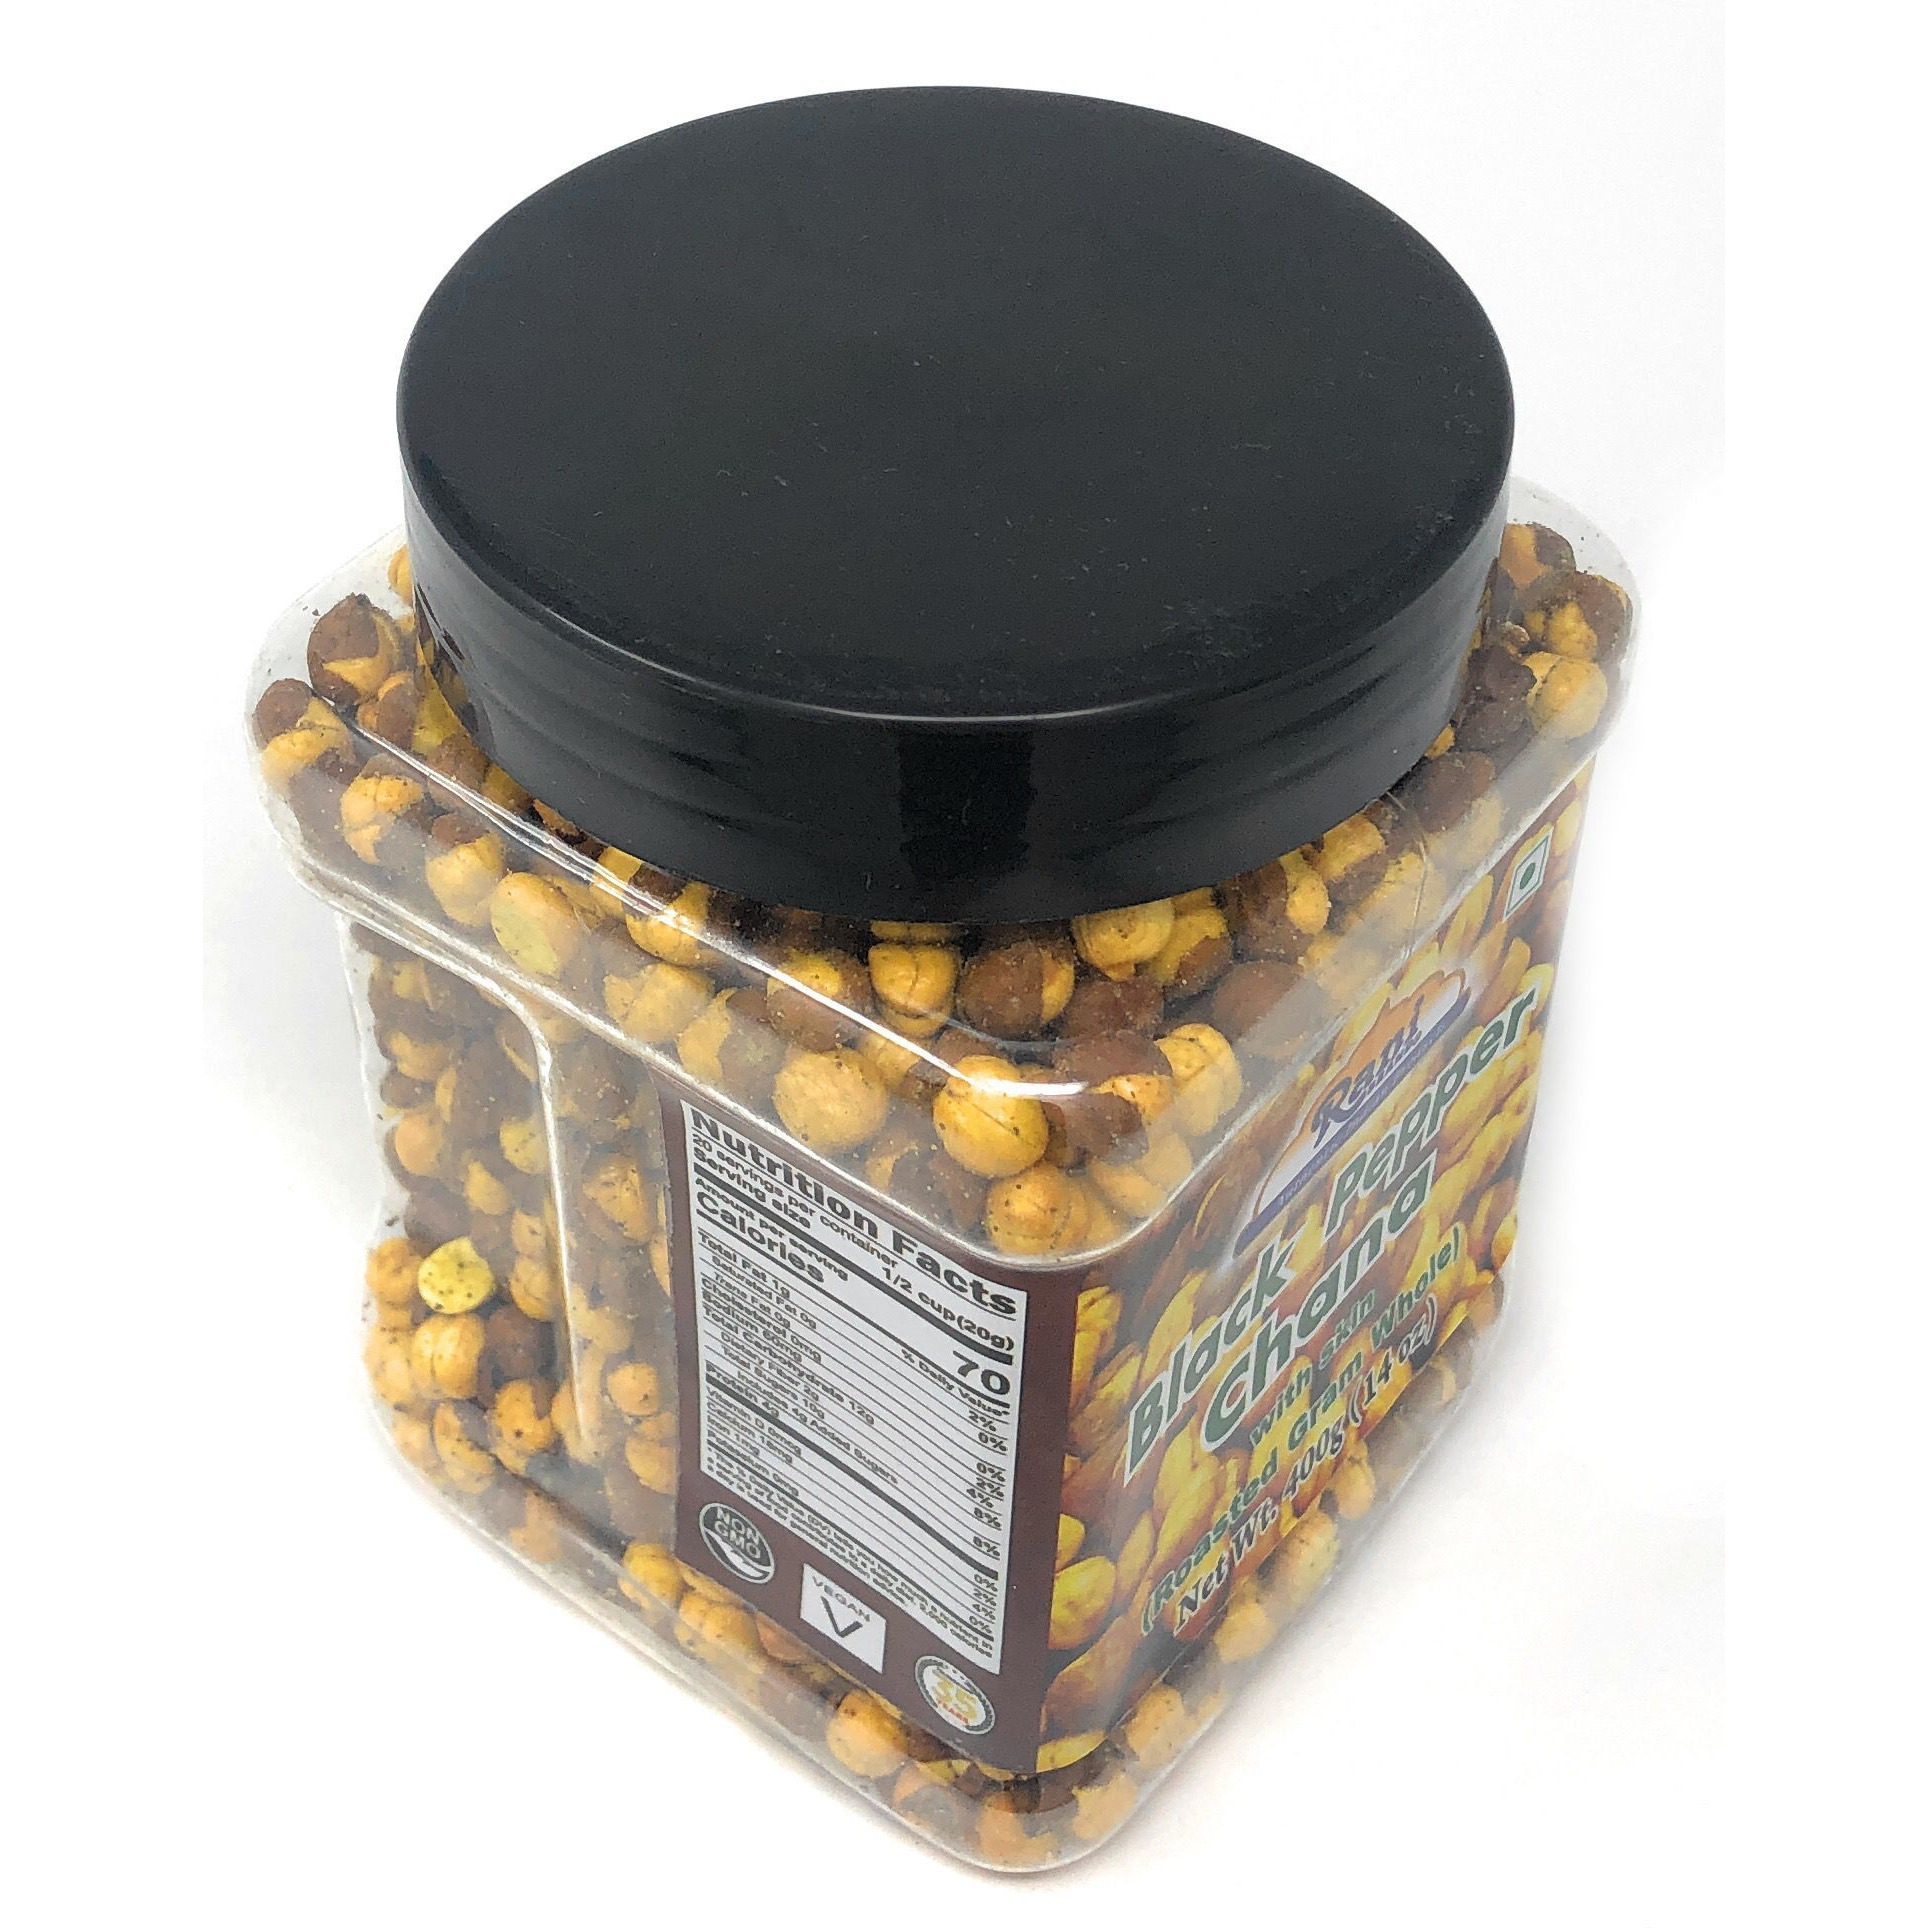 Rani Roasted Chana (Chickpeas) Black Pepper Flavor 14oz (400g) ~ All Natural | Vegan | No Preservatives | No Colors | Great Snack, Ready to Eat, Seasoned with 5 Spices, Indian Origin